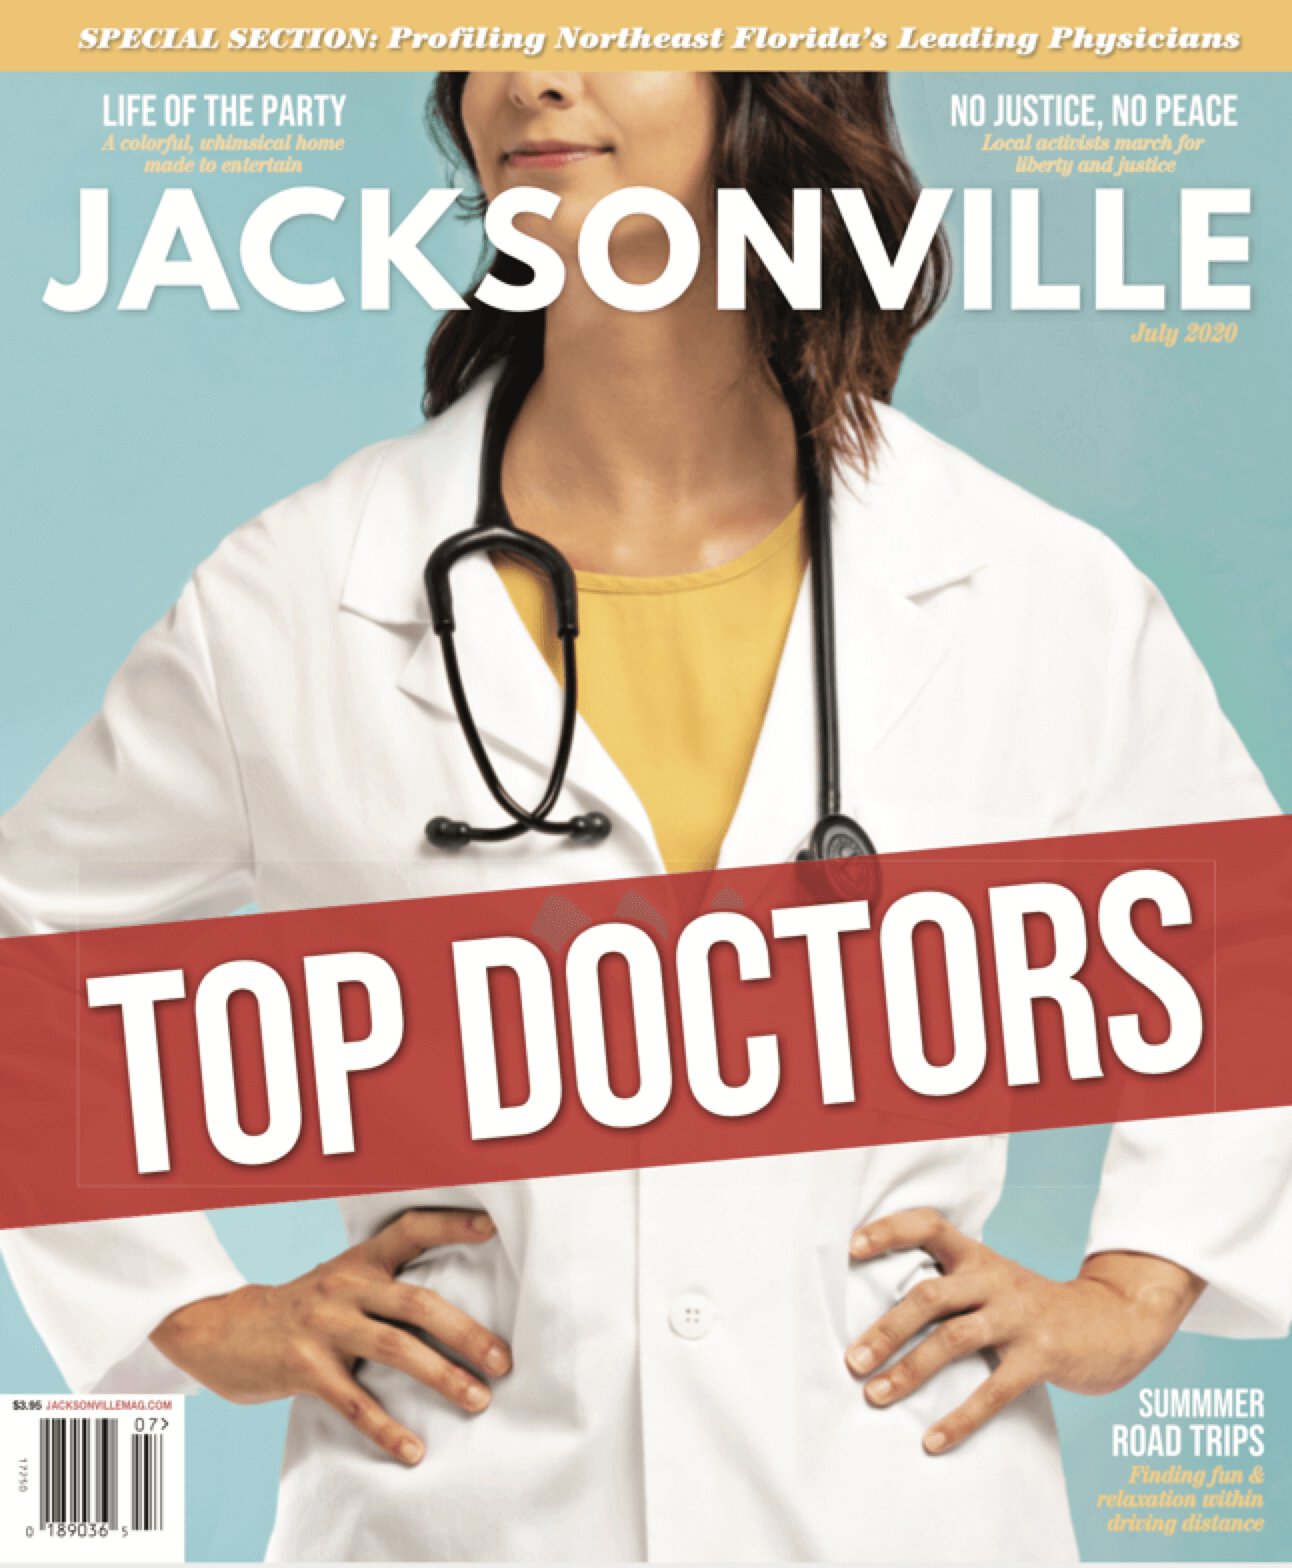 Jacksonville Magazine July 2020, Top Doctors Issue